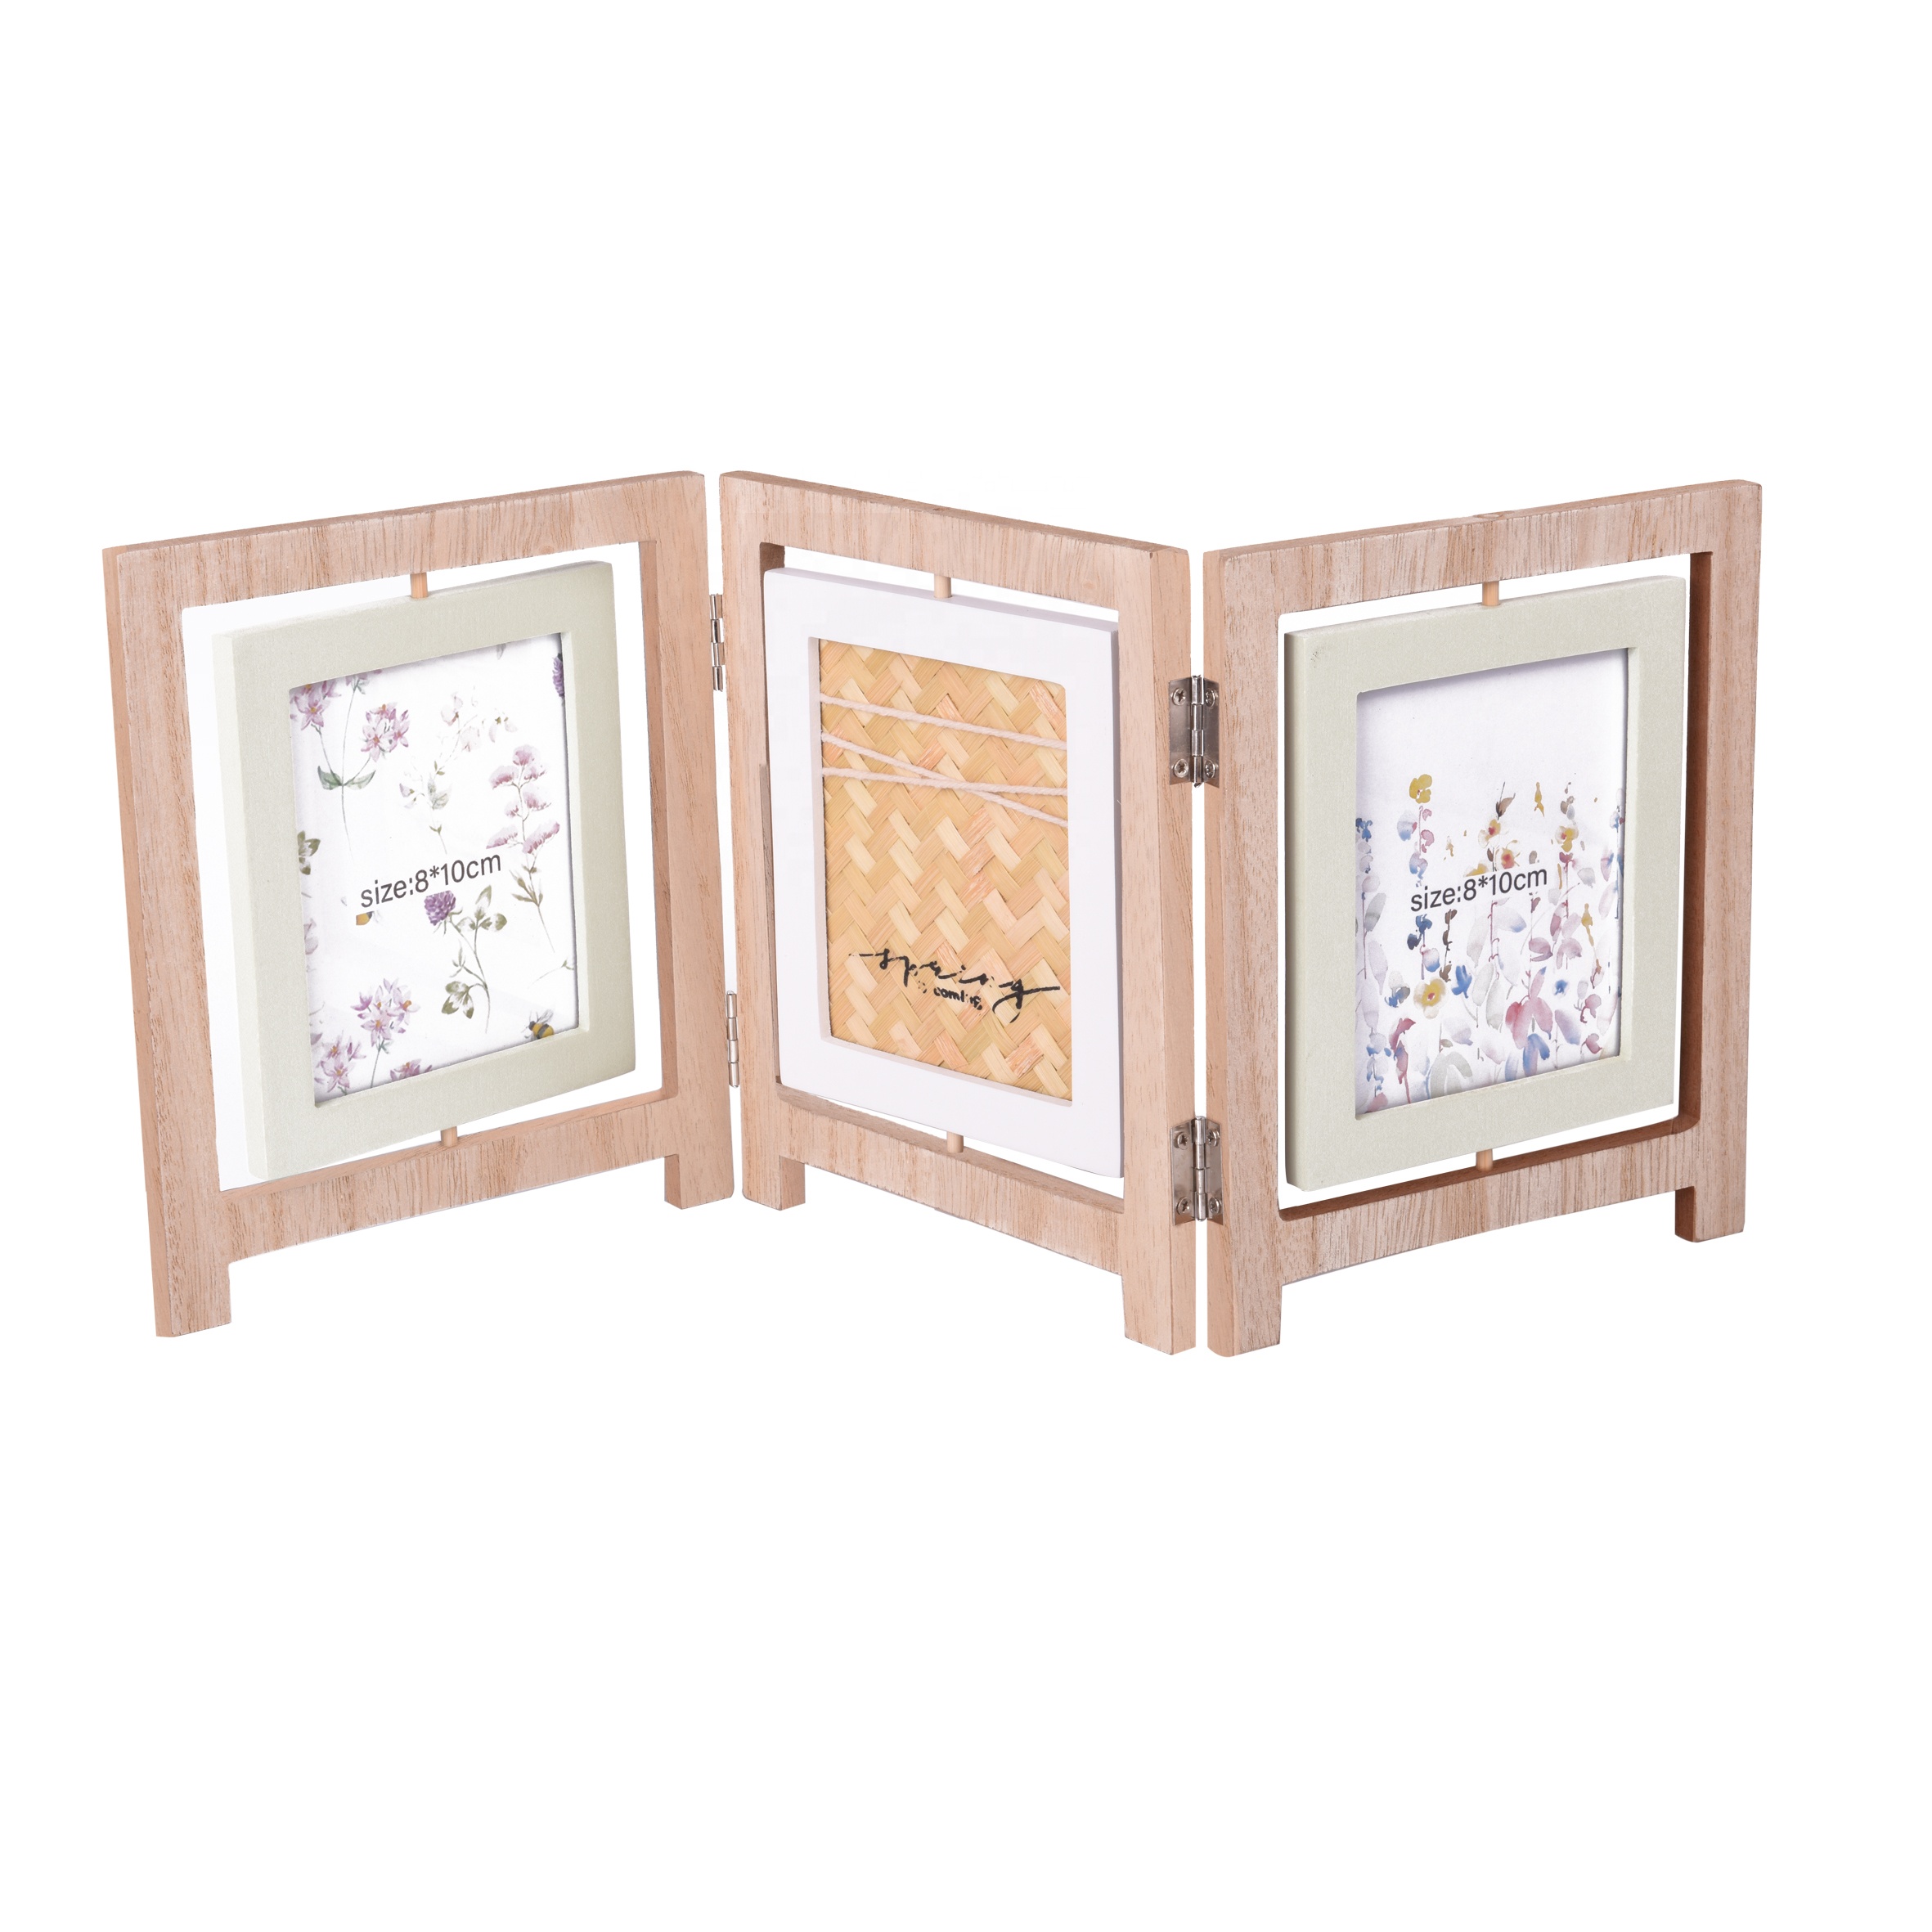 Wooden Wholesale composite Picture Photo Frame For Home Decor